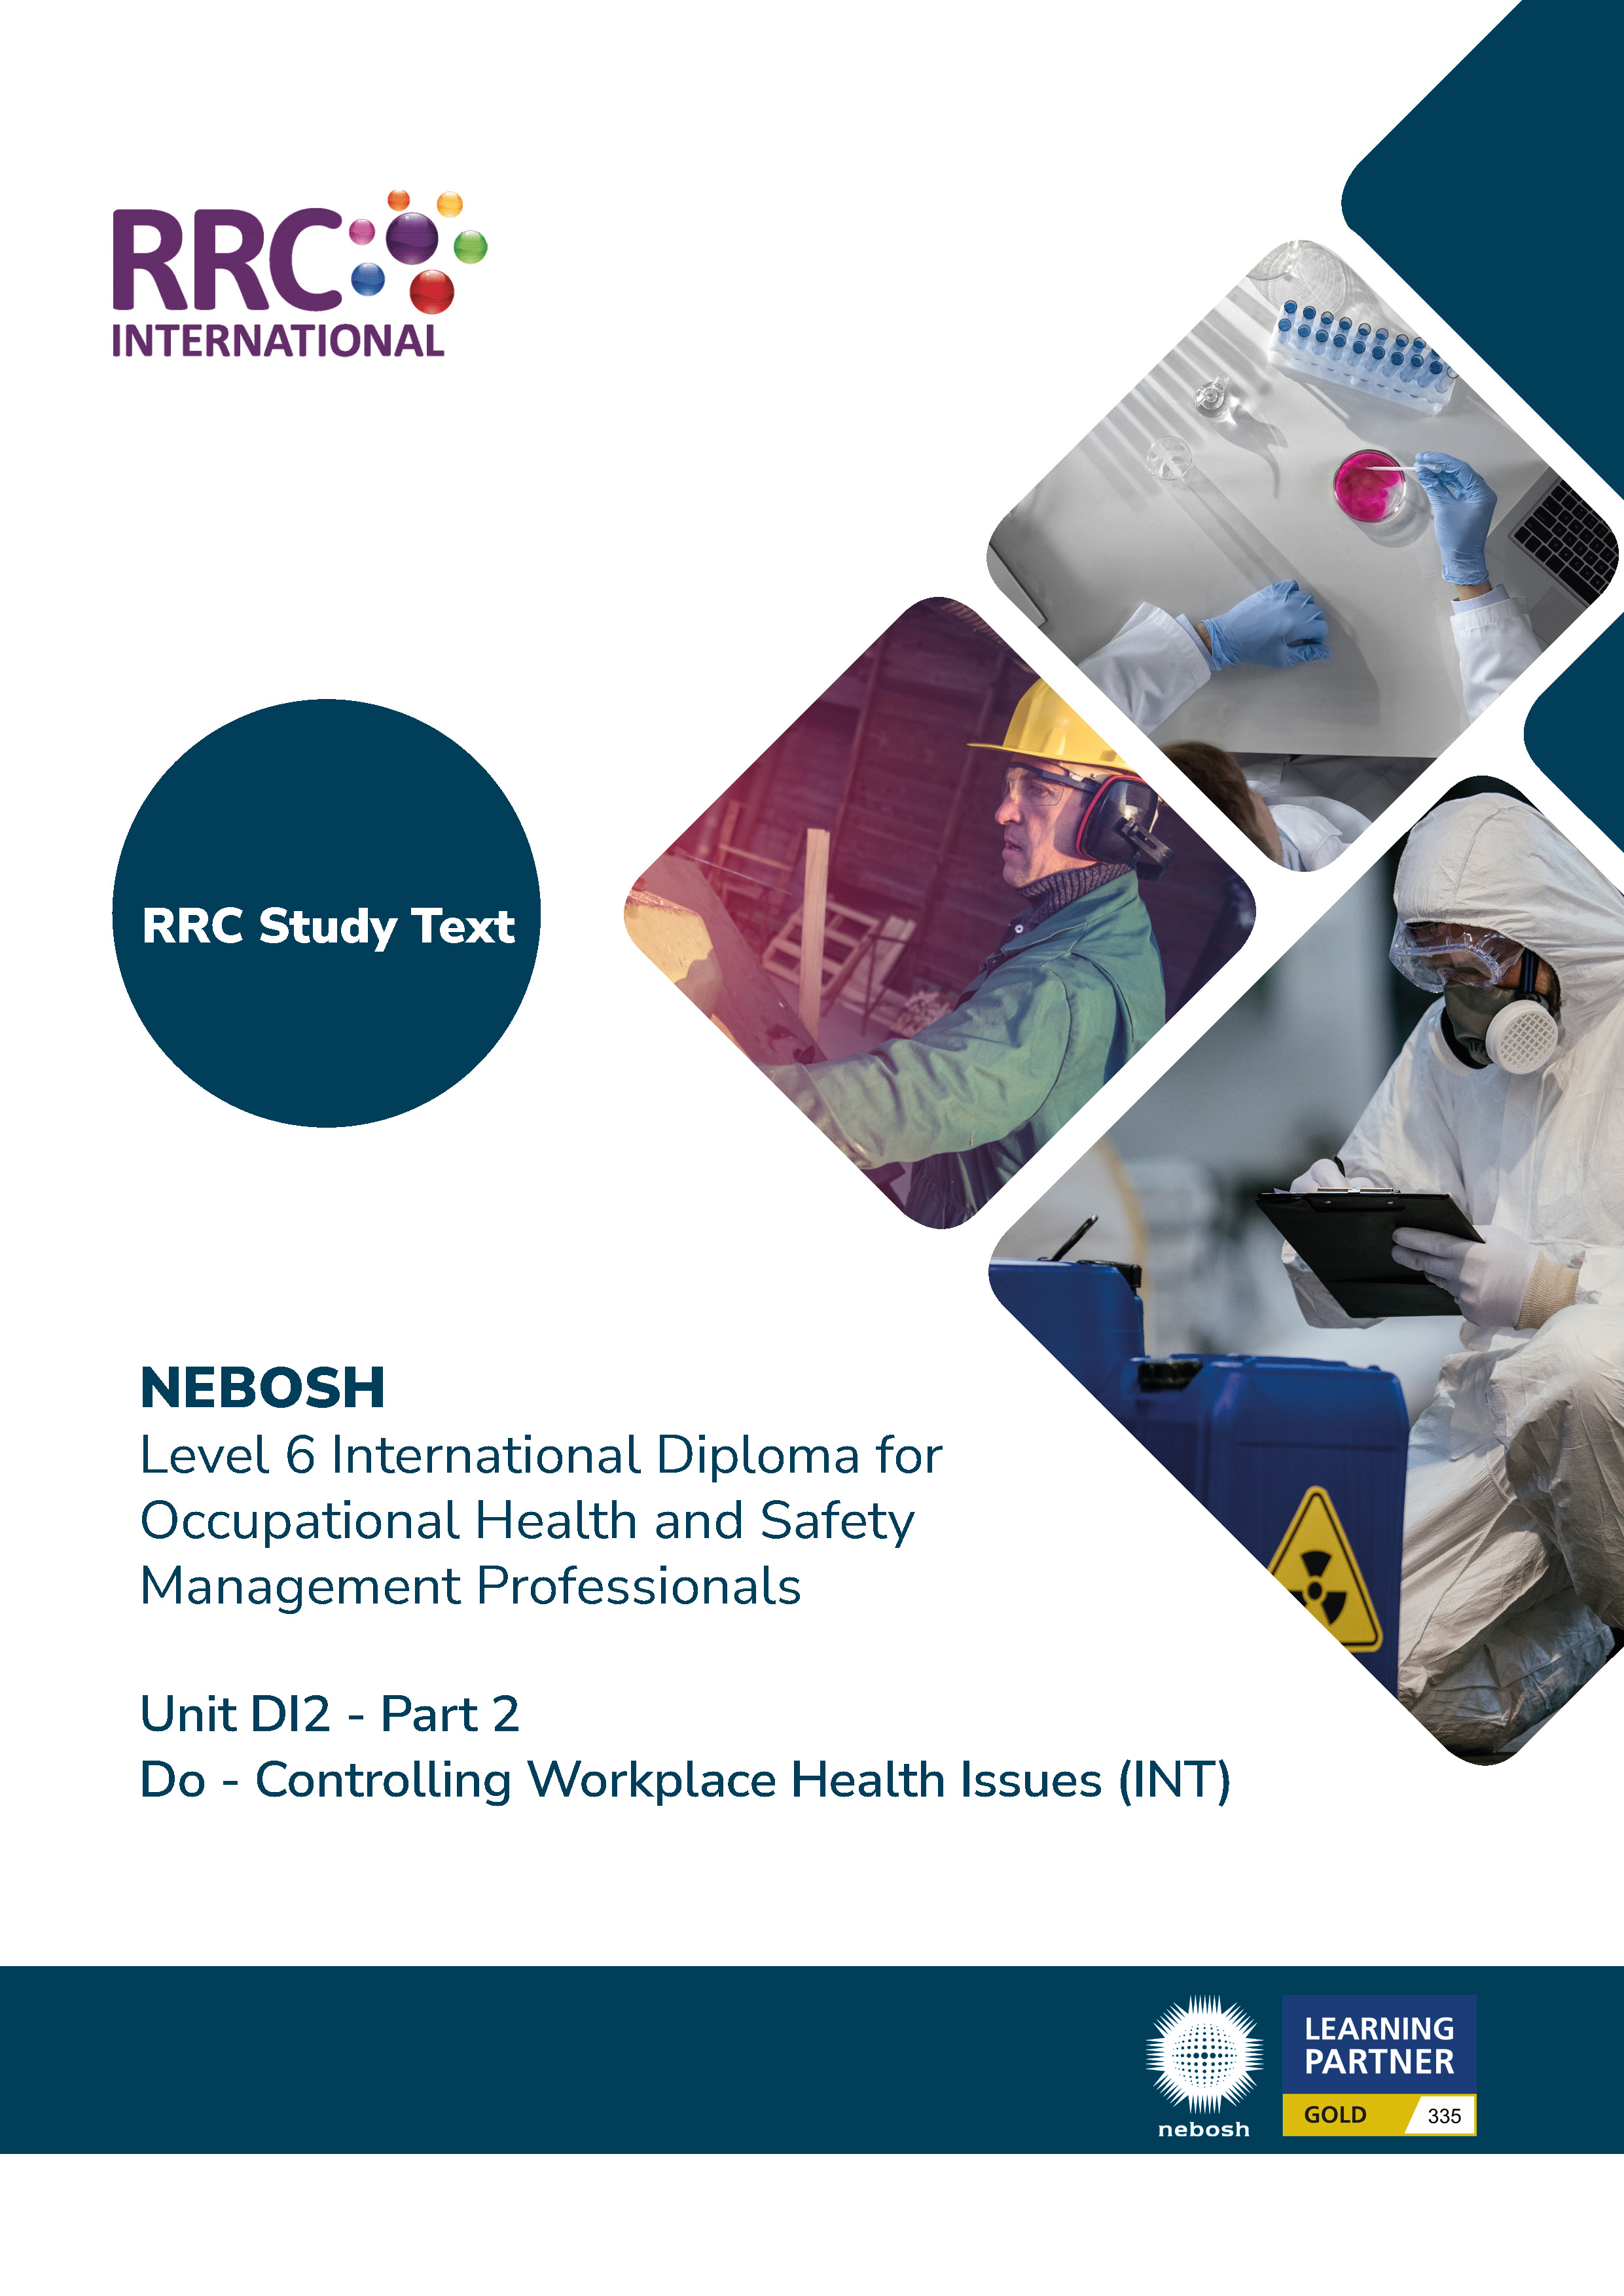 A Guide to the NEBOSH International Diploma for Occupational Health and Safety Management Professionals – Unit DI2: Do - Controlling Workplace Health Issues (International) Book Image